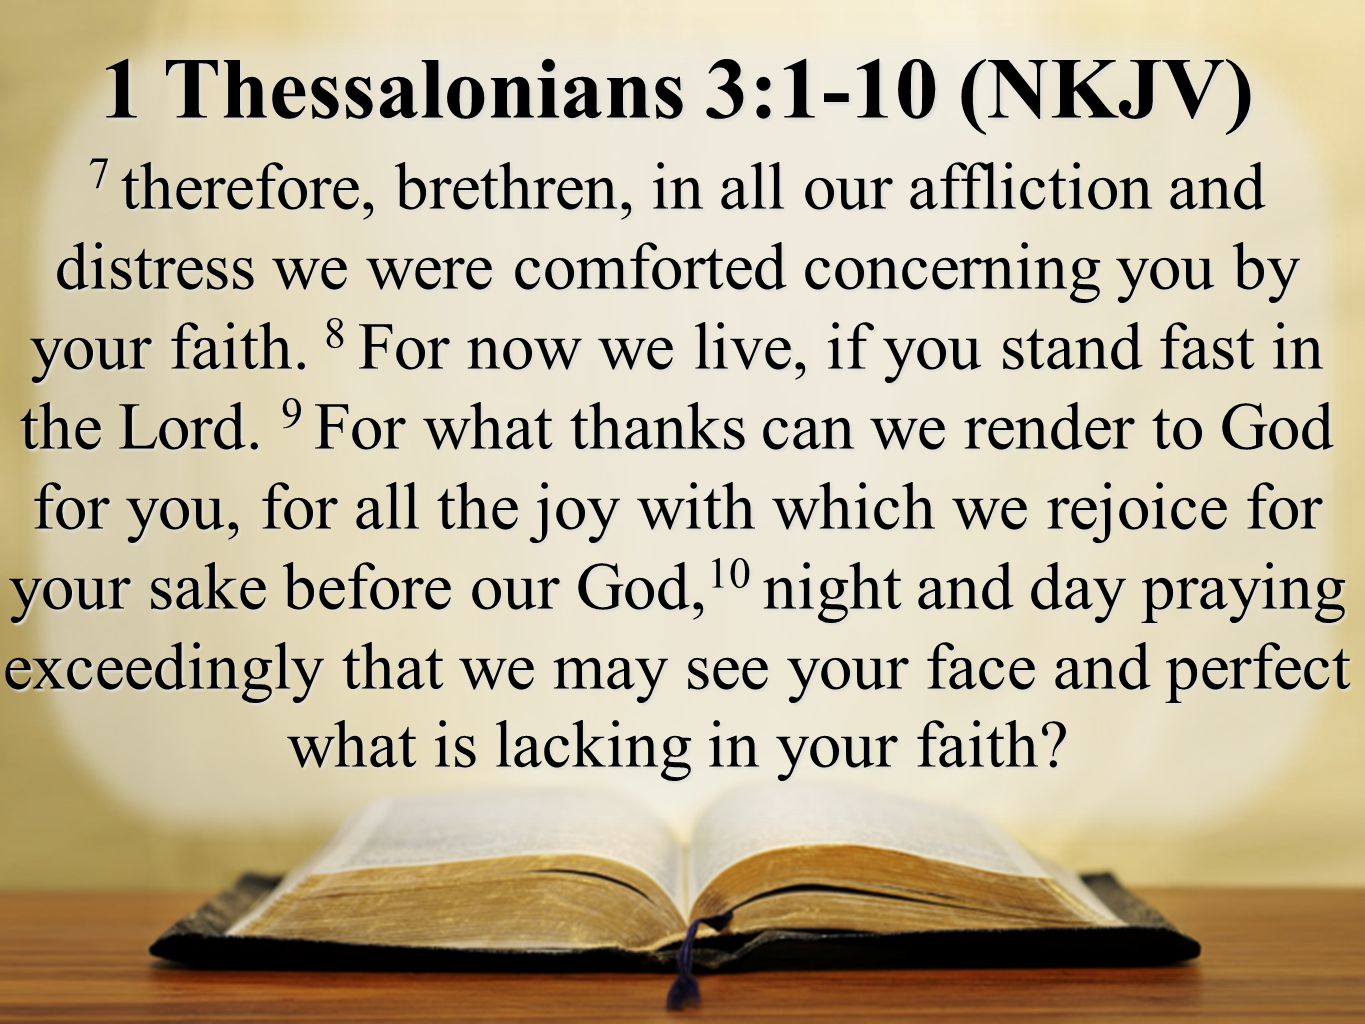 1 Thessalonians 3:1-10 (NKJV) 7 therefore, brethren, in all our affliction and distress we were comforted concerning you by your faith.